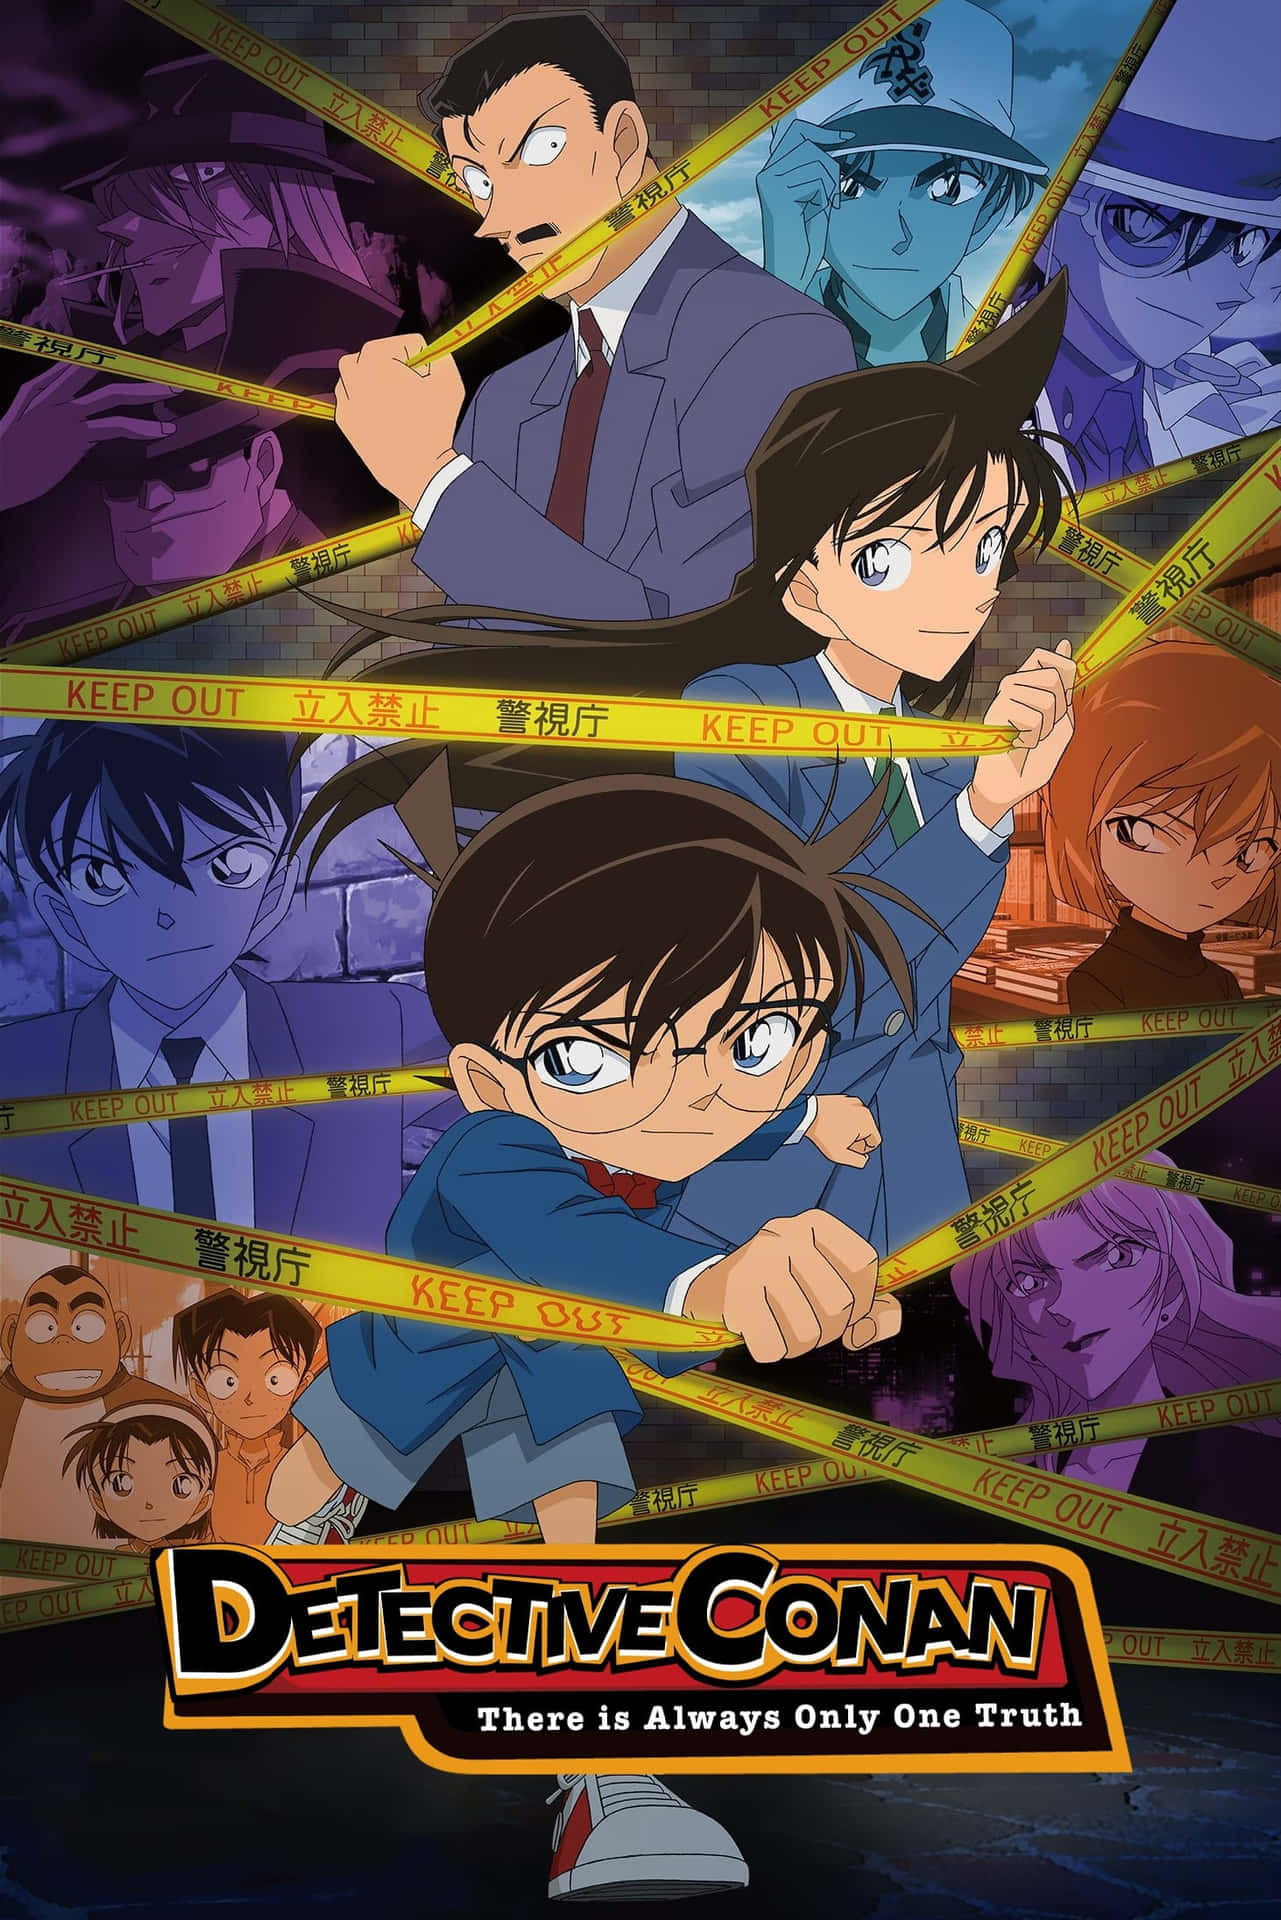 The Great Detective Conan Has a Case to Solve